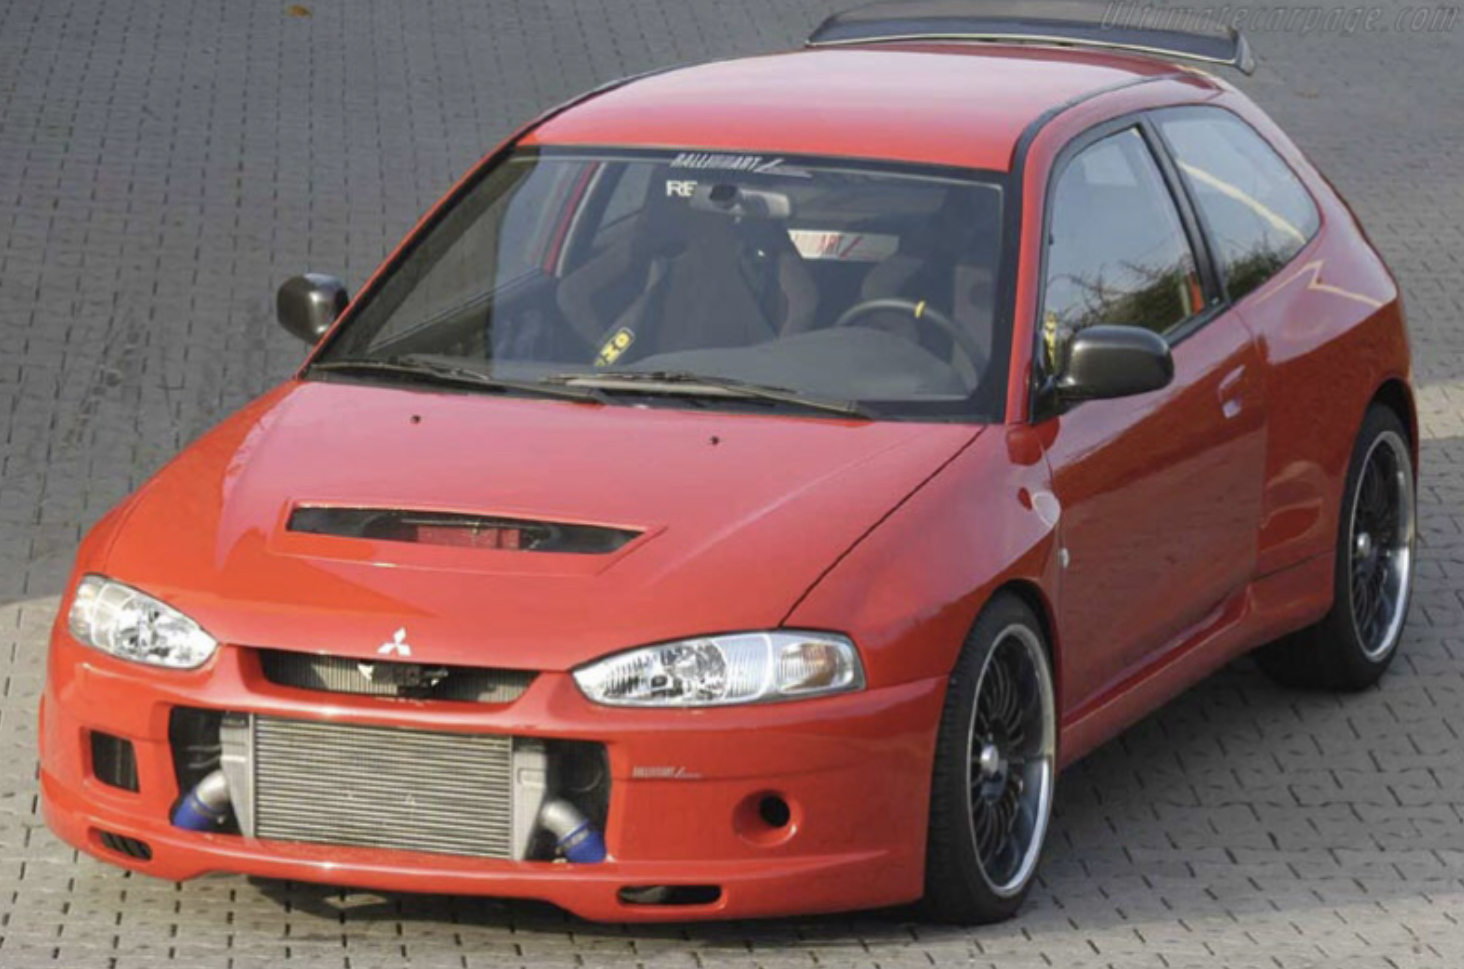 Mitsubishi Colt Mirage 1995-2002 - Car Voting - Official Forza Community  Forums